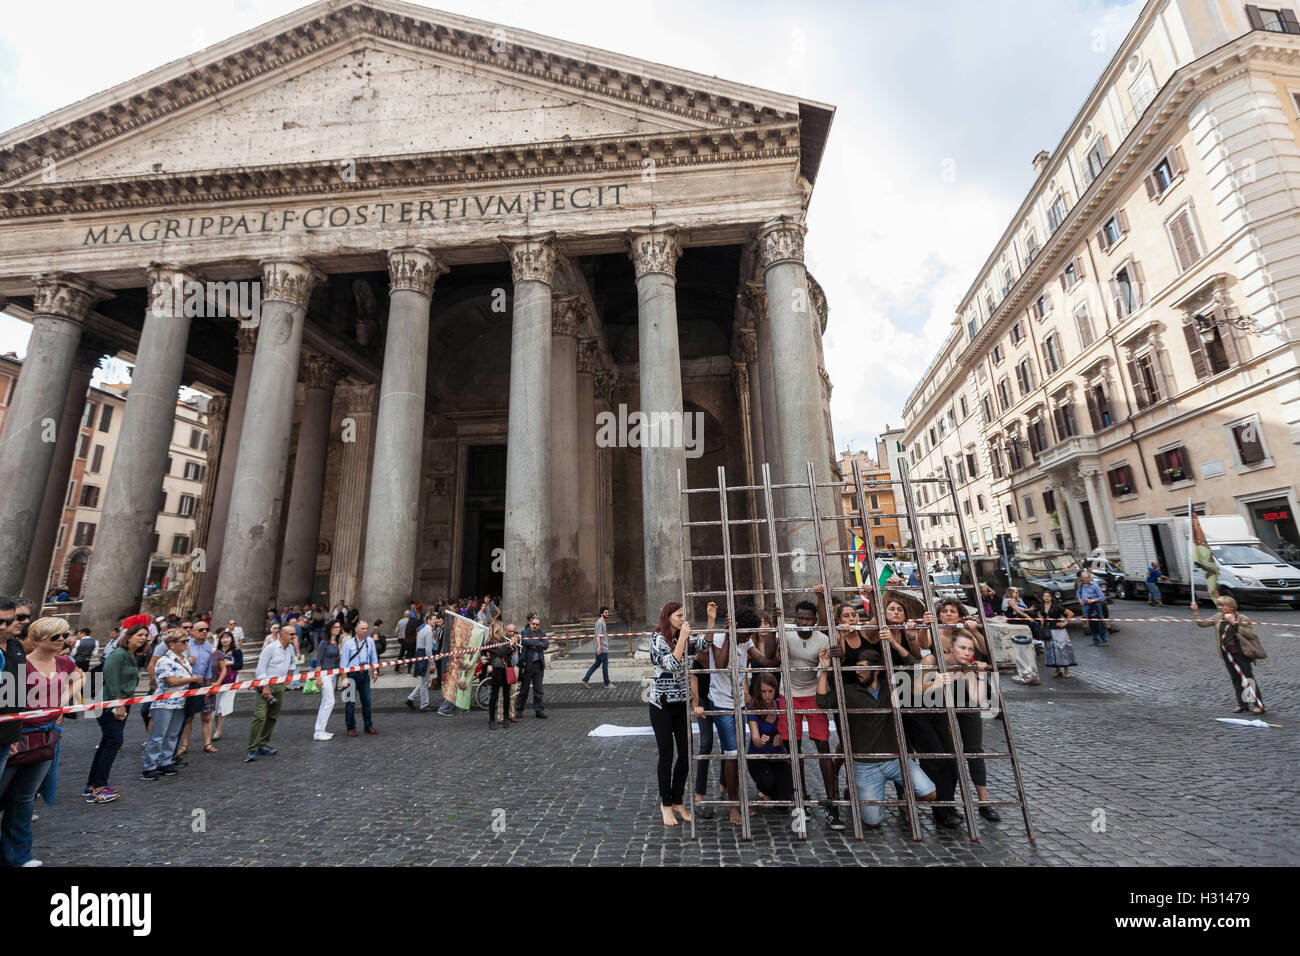 Rome, Italy. 03rd October, 2016. Members of ARCI association hold a 'flashmob' in Pantheon Square to remember the victims of immigration in Rome, Italy on October 03, 2016. The Italian Republic recognises 3 October as National Day in memory of the victims of immigration, commemorating those “who lost their lives trying to emigrate towards our country to escape wars, persecution and poverty”. The day is chosen to pay respect to the 366 migrants who drowned on October 3 2012 in the Mediterranean in view of the Sicilian Island of Lampedusa. Credit:  Giuseppe Ciccia/Alamy Live News Stock Photo